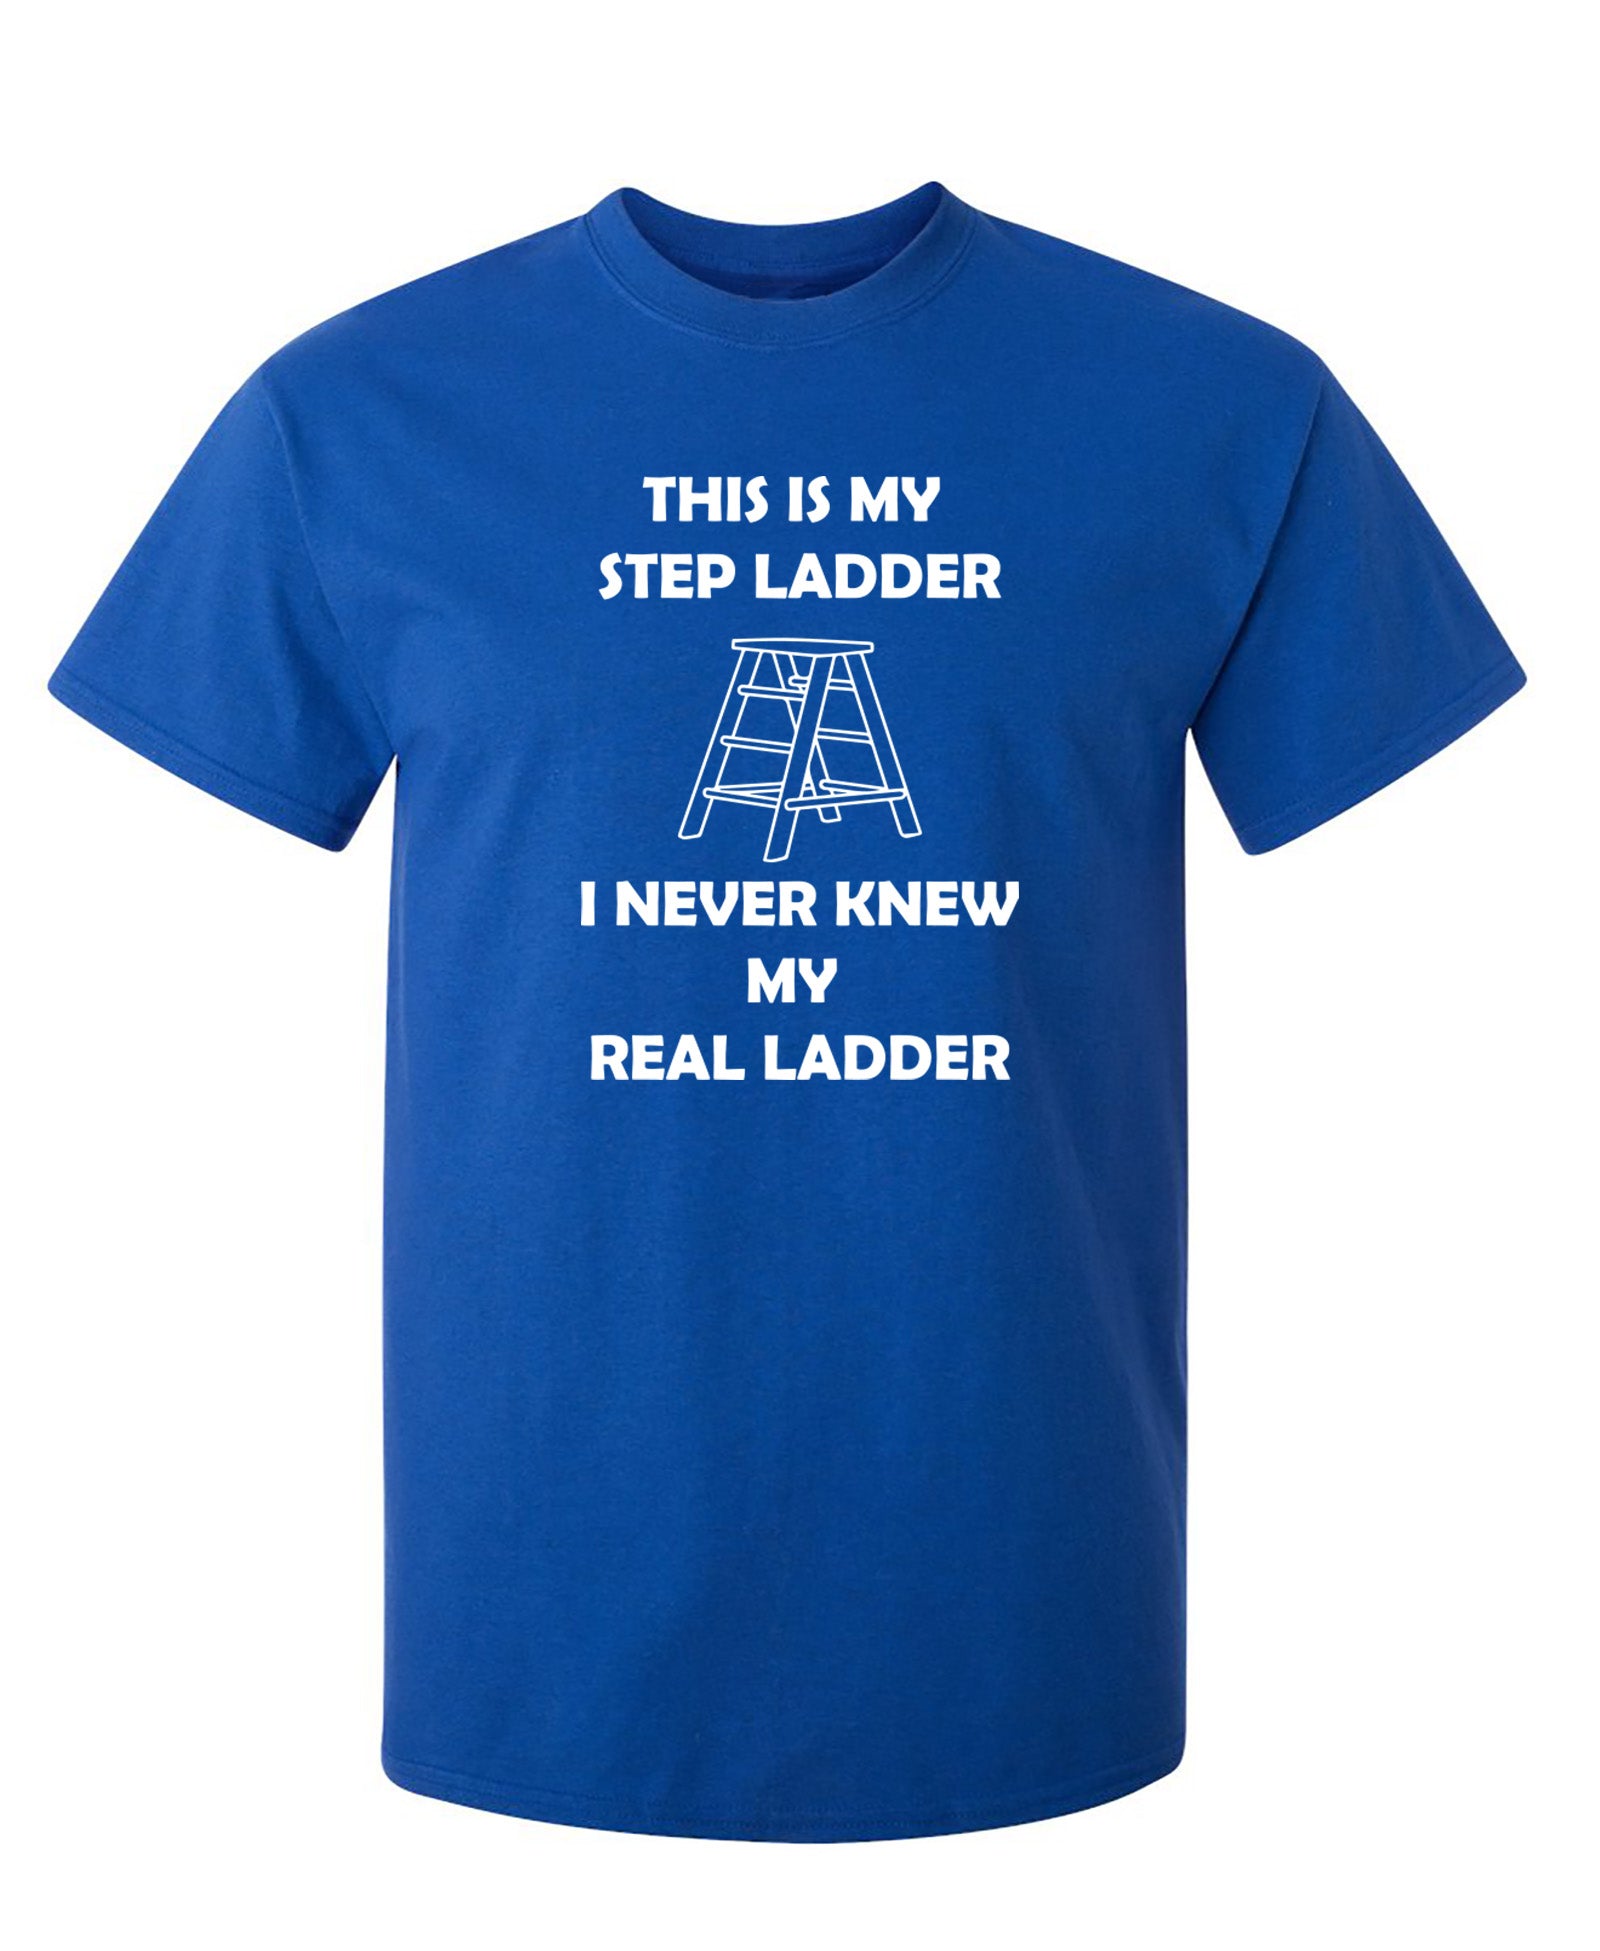 This Is My Step Ladder - Funny T Shirts & Graphic Tees